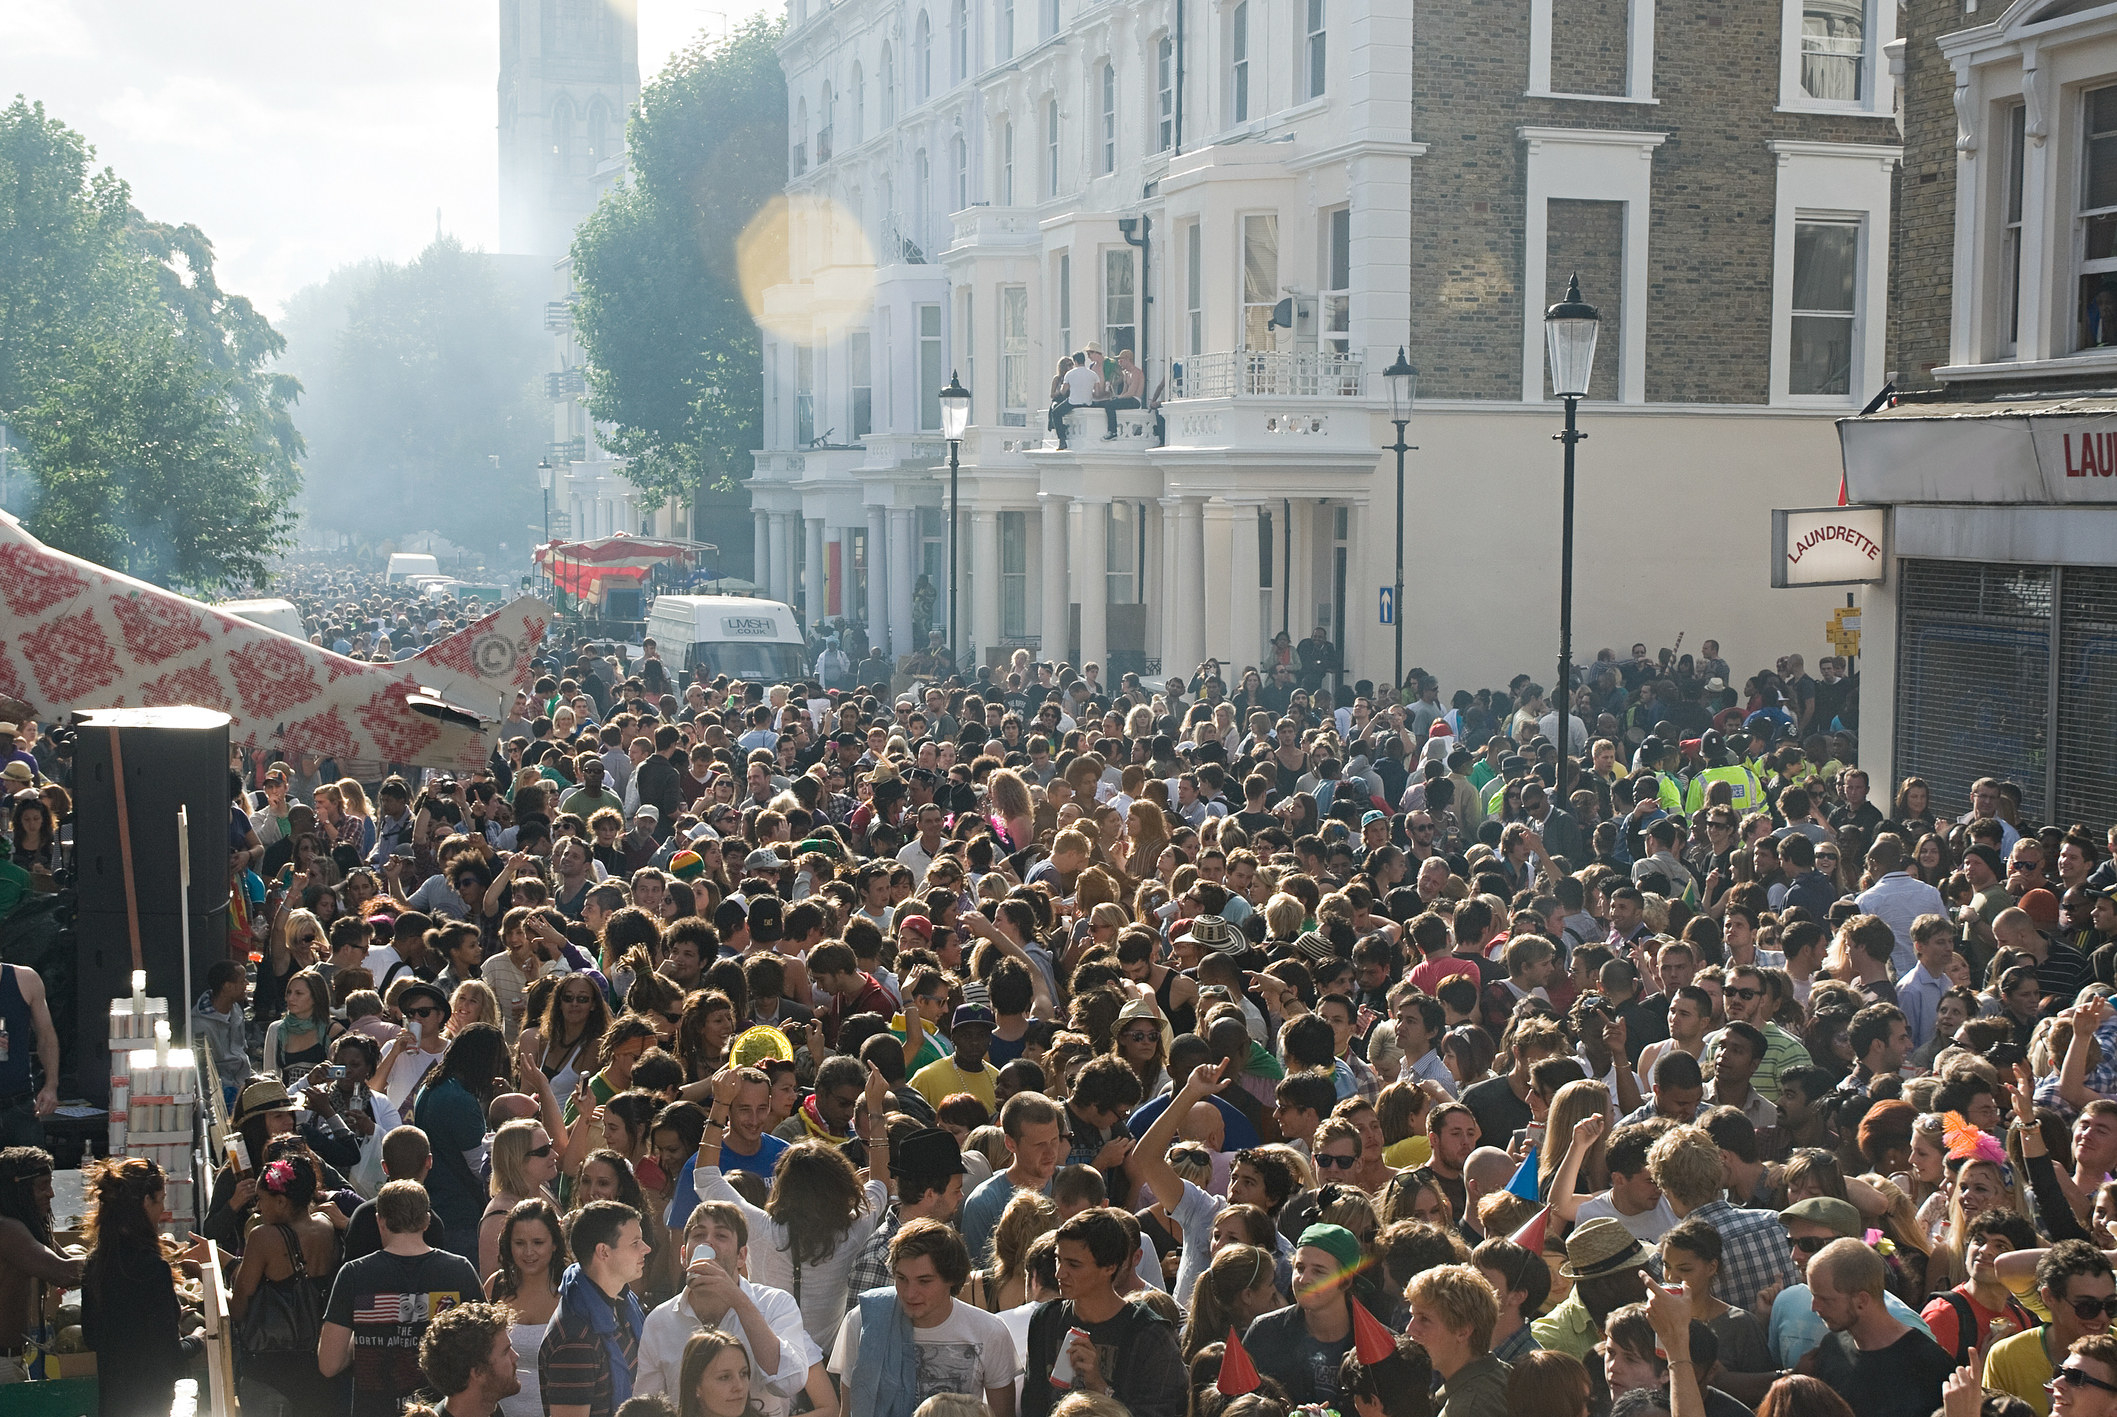 Notting Hill Carnival crowd. 